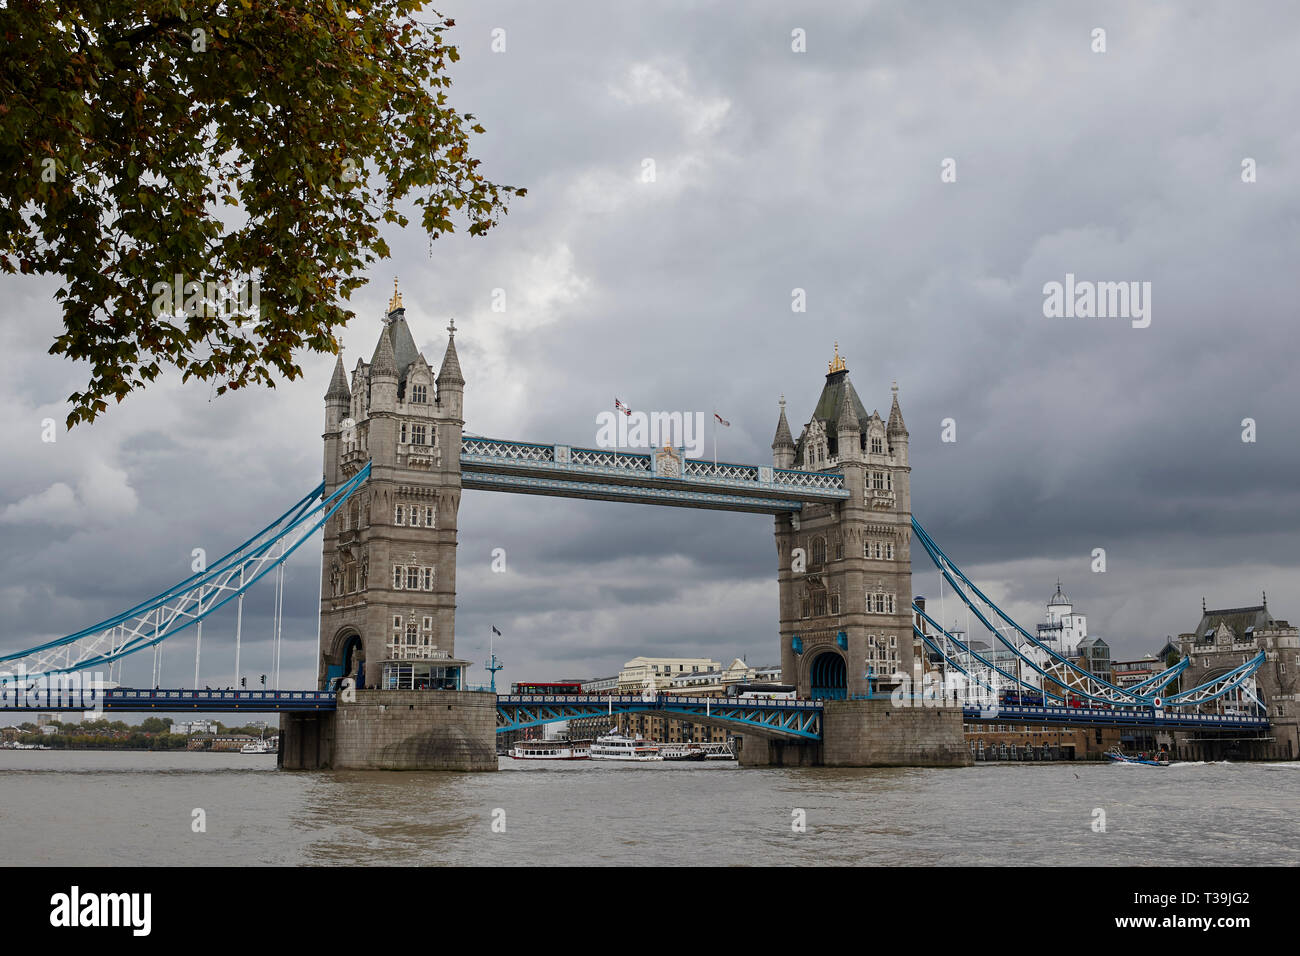 London's iconic Tower Bridge on an overcast day, viewed from the Tower of London from the north bank of the River Thames, London, Engla Stock Photo